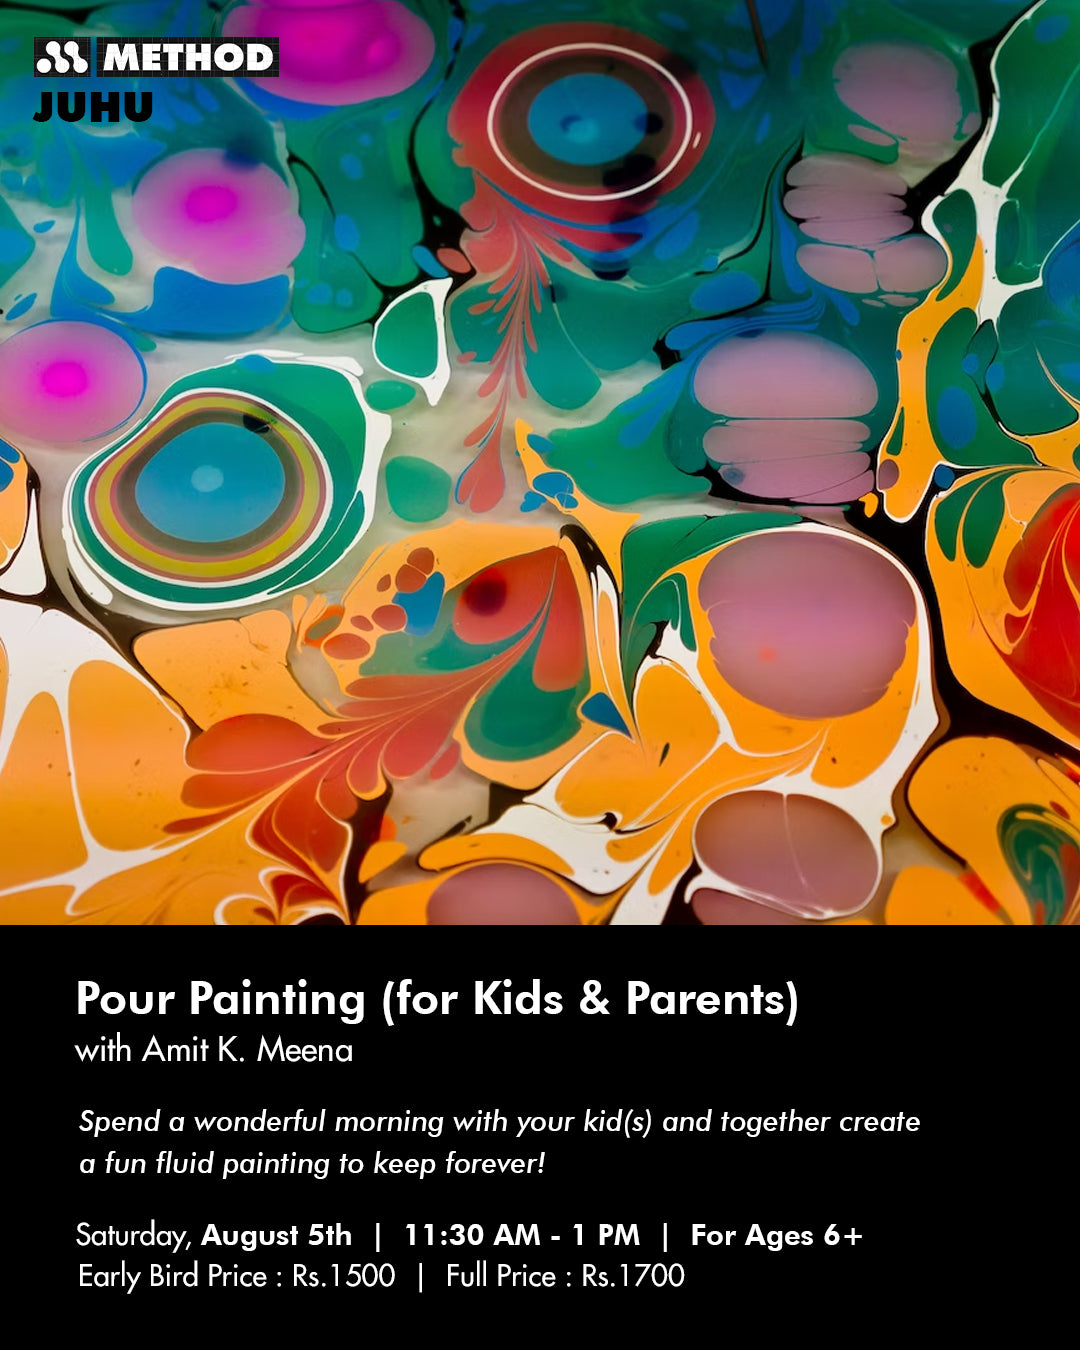 Pour Painting (for Kids + Parents) with Amit K. Meena | Aug 5 | Workshop | Method Juhu